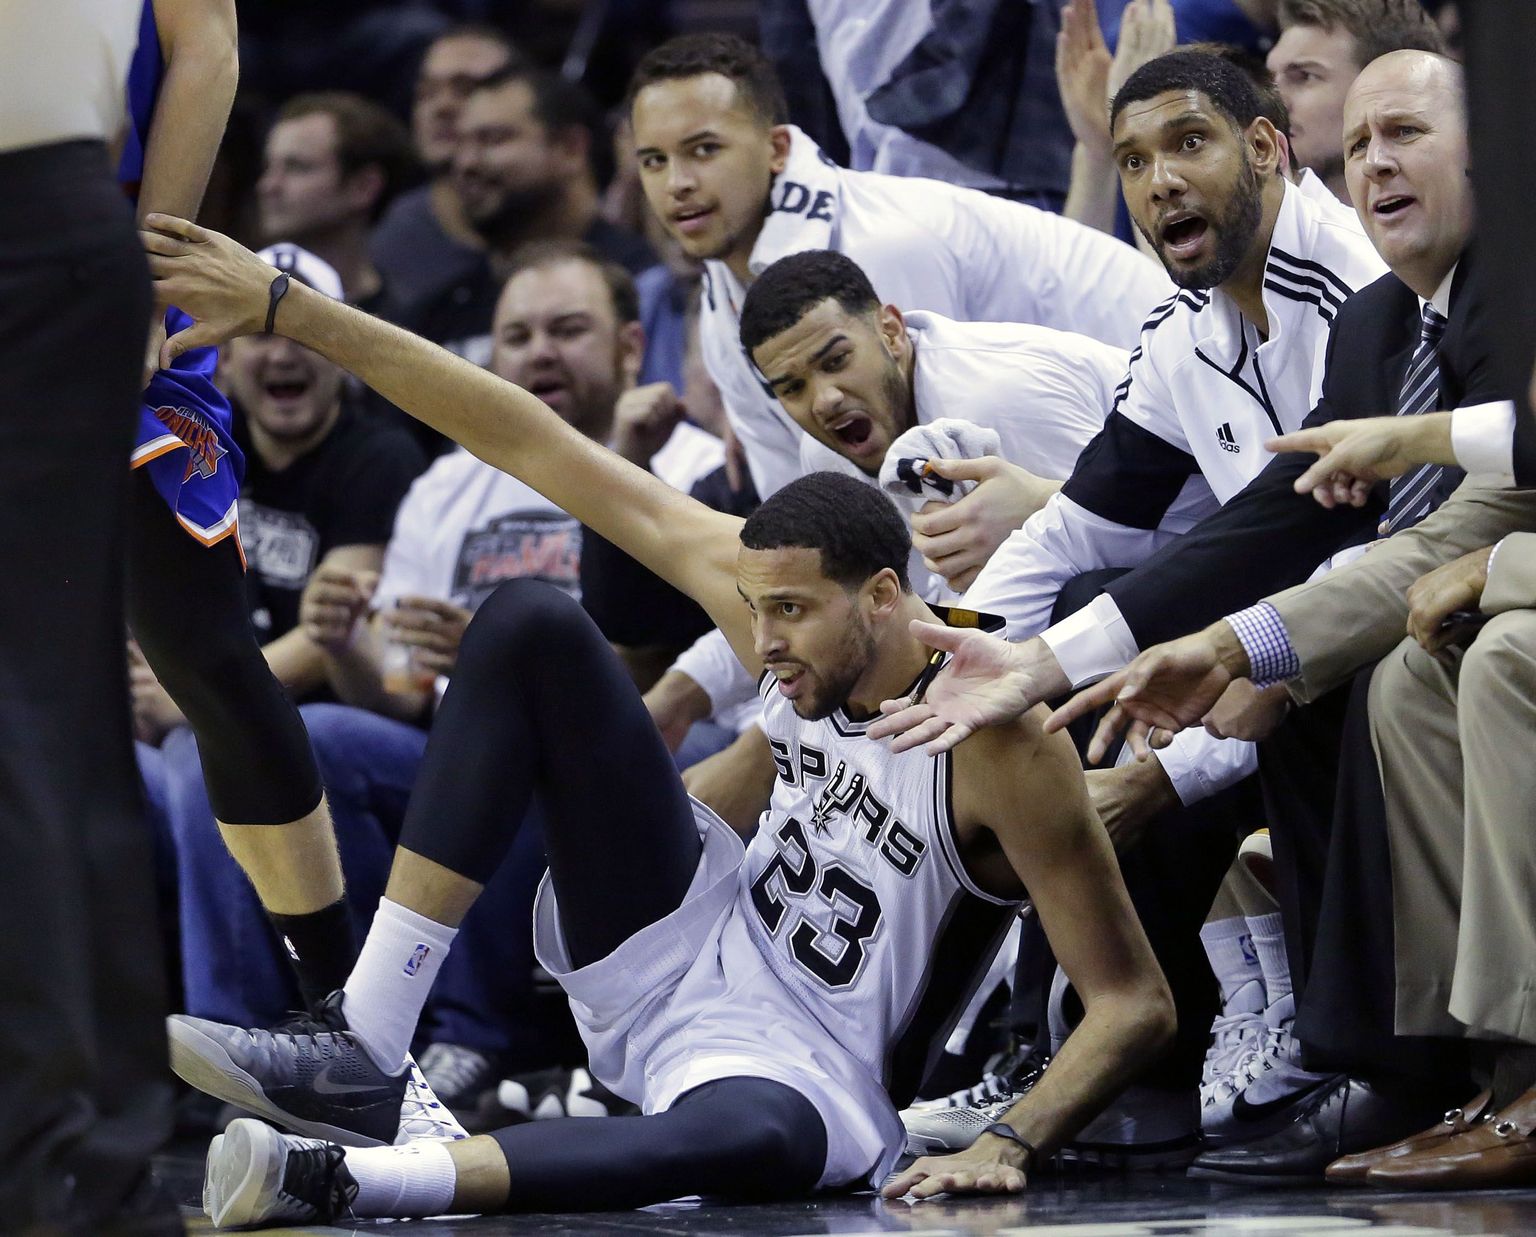 San Antonio Spurs' Austin Daye (23) and the Spurs bench look for a foul call after he crashed to the floor after hitting a basket against the New York Knicks during the first half of an NBA basketball game, Wednesday, Dec. 10, 2014, in San Antonio. (AP Photo/Eric Gay)